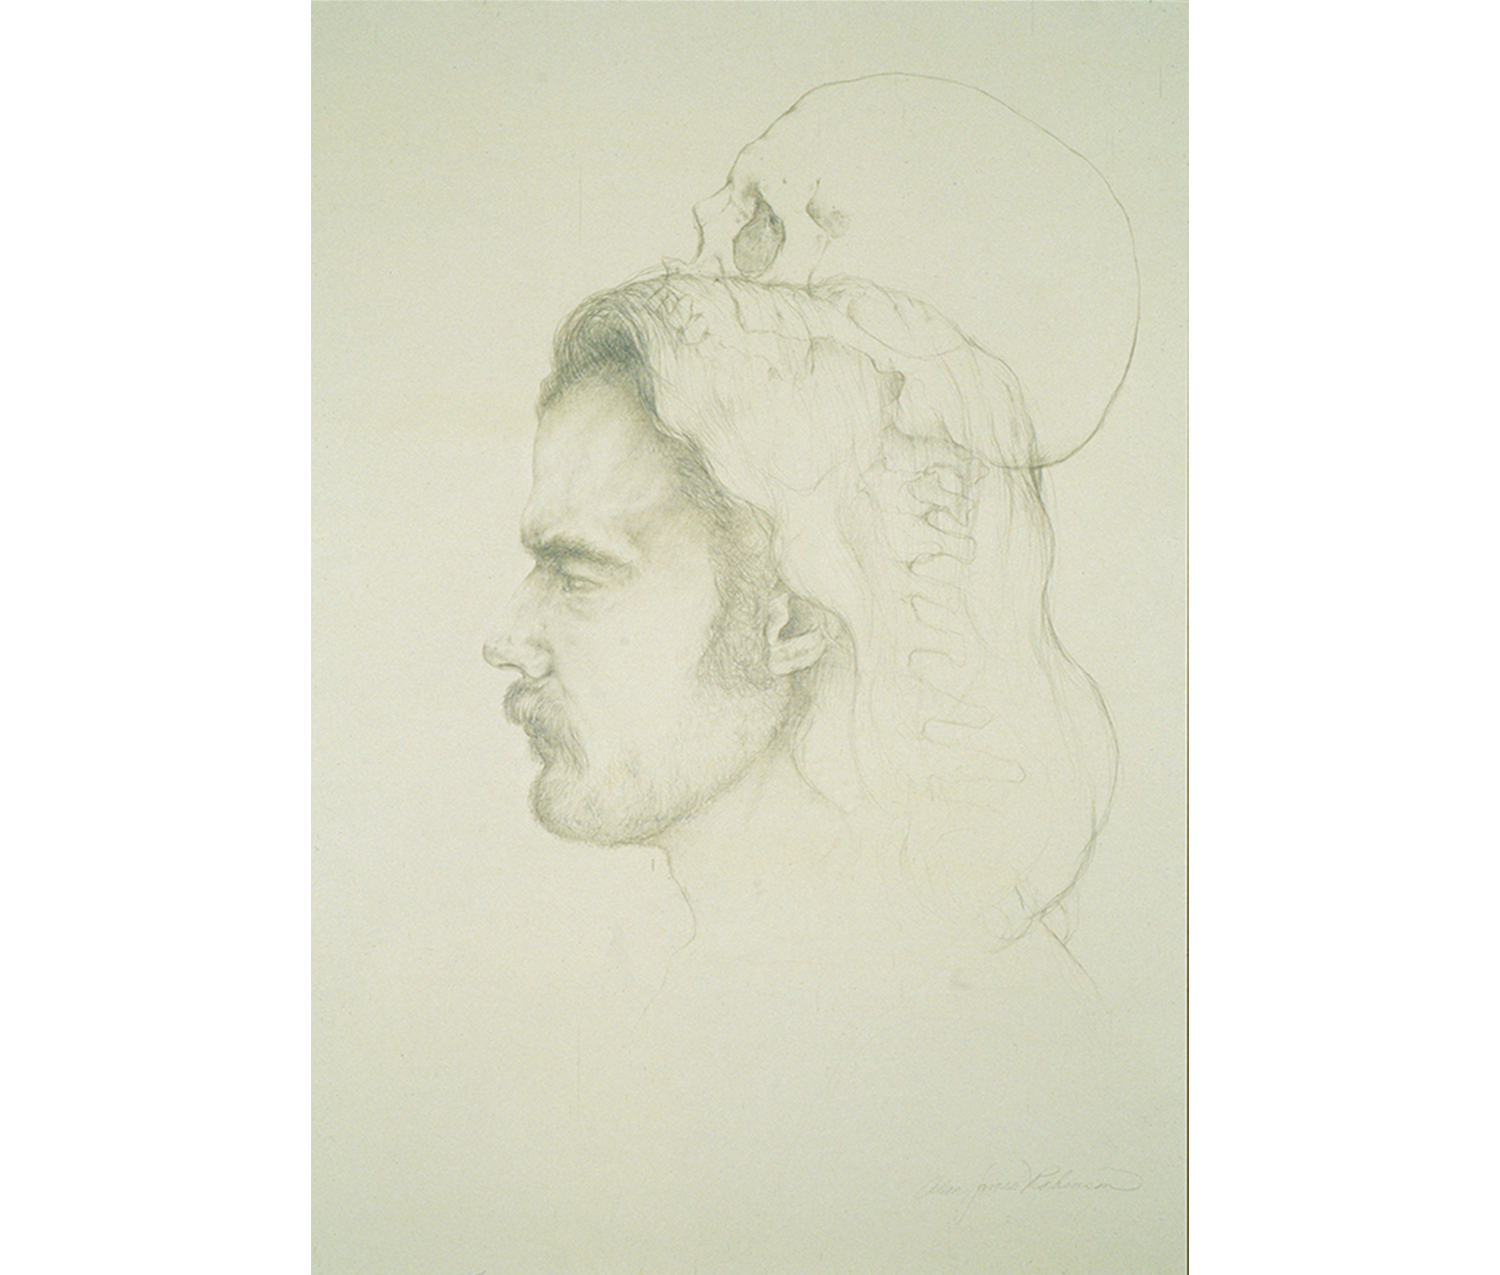 profile of a man with beard and long hair, sketch of a skull on top of his head